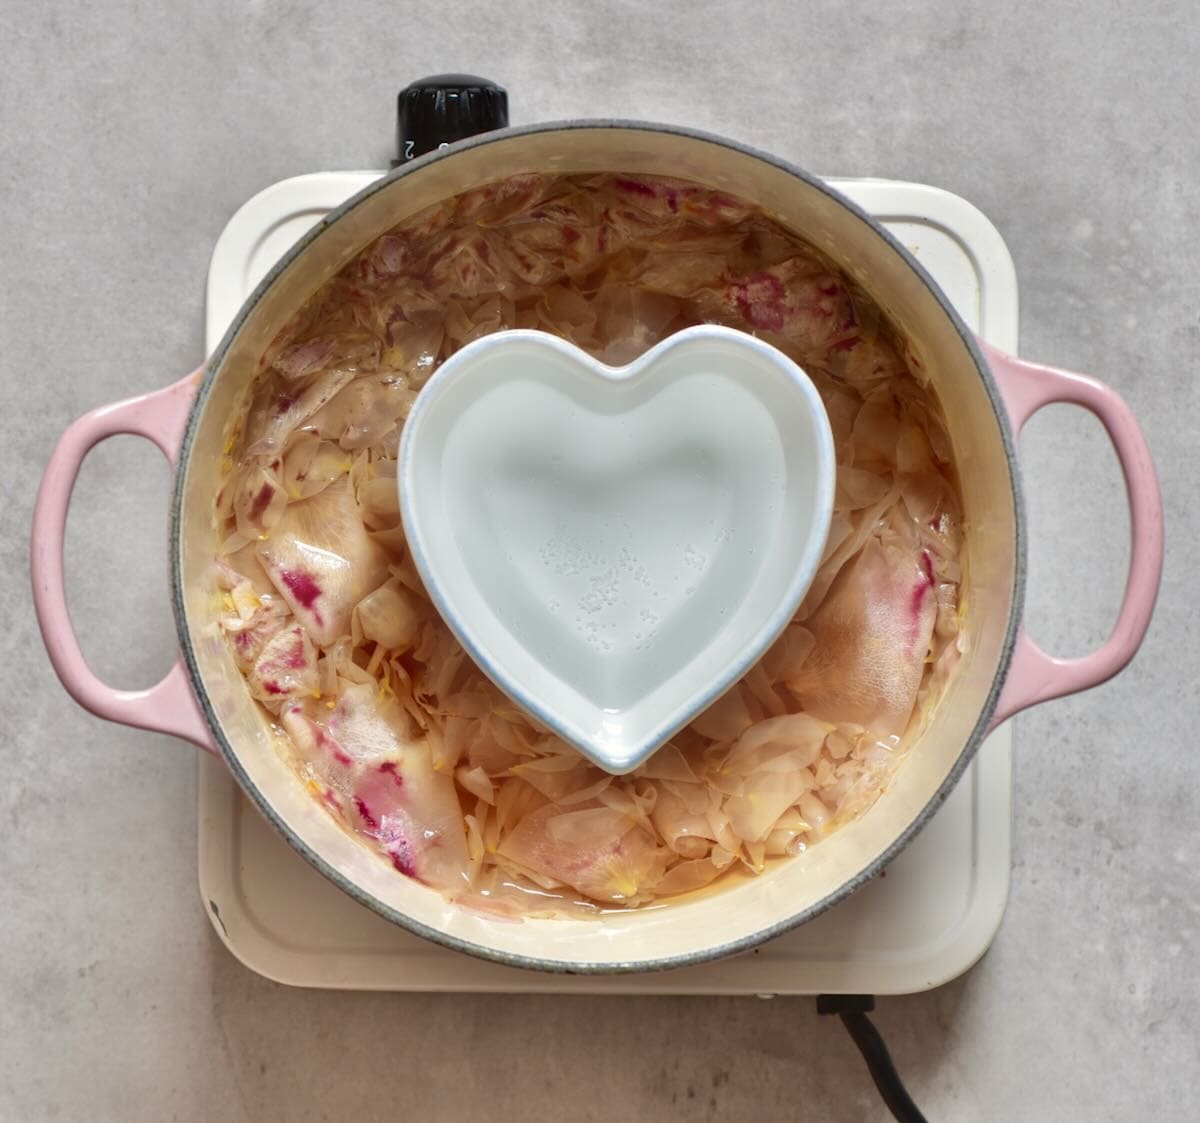 A saucepan with a small bowl filled with distilled rose water